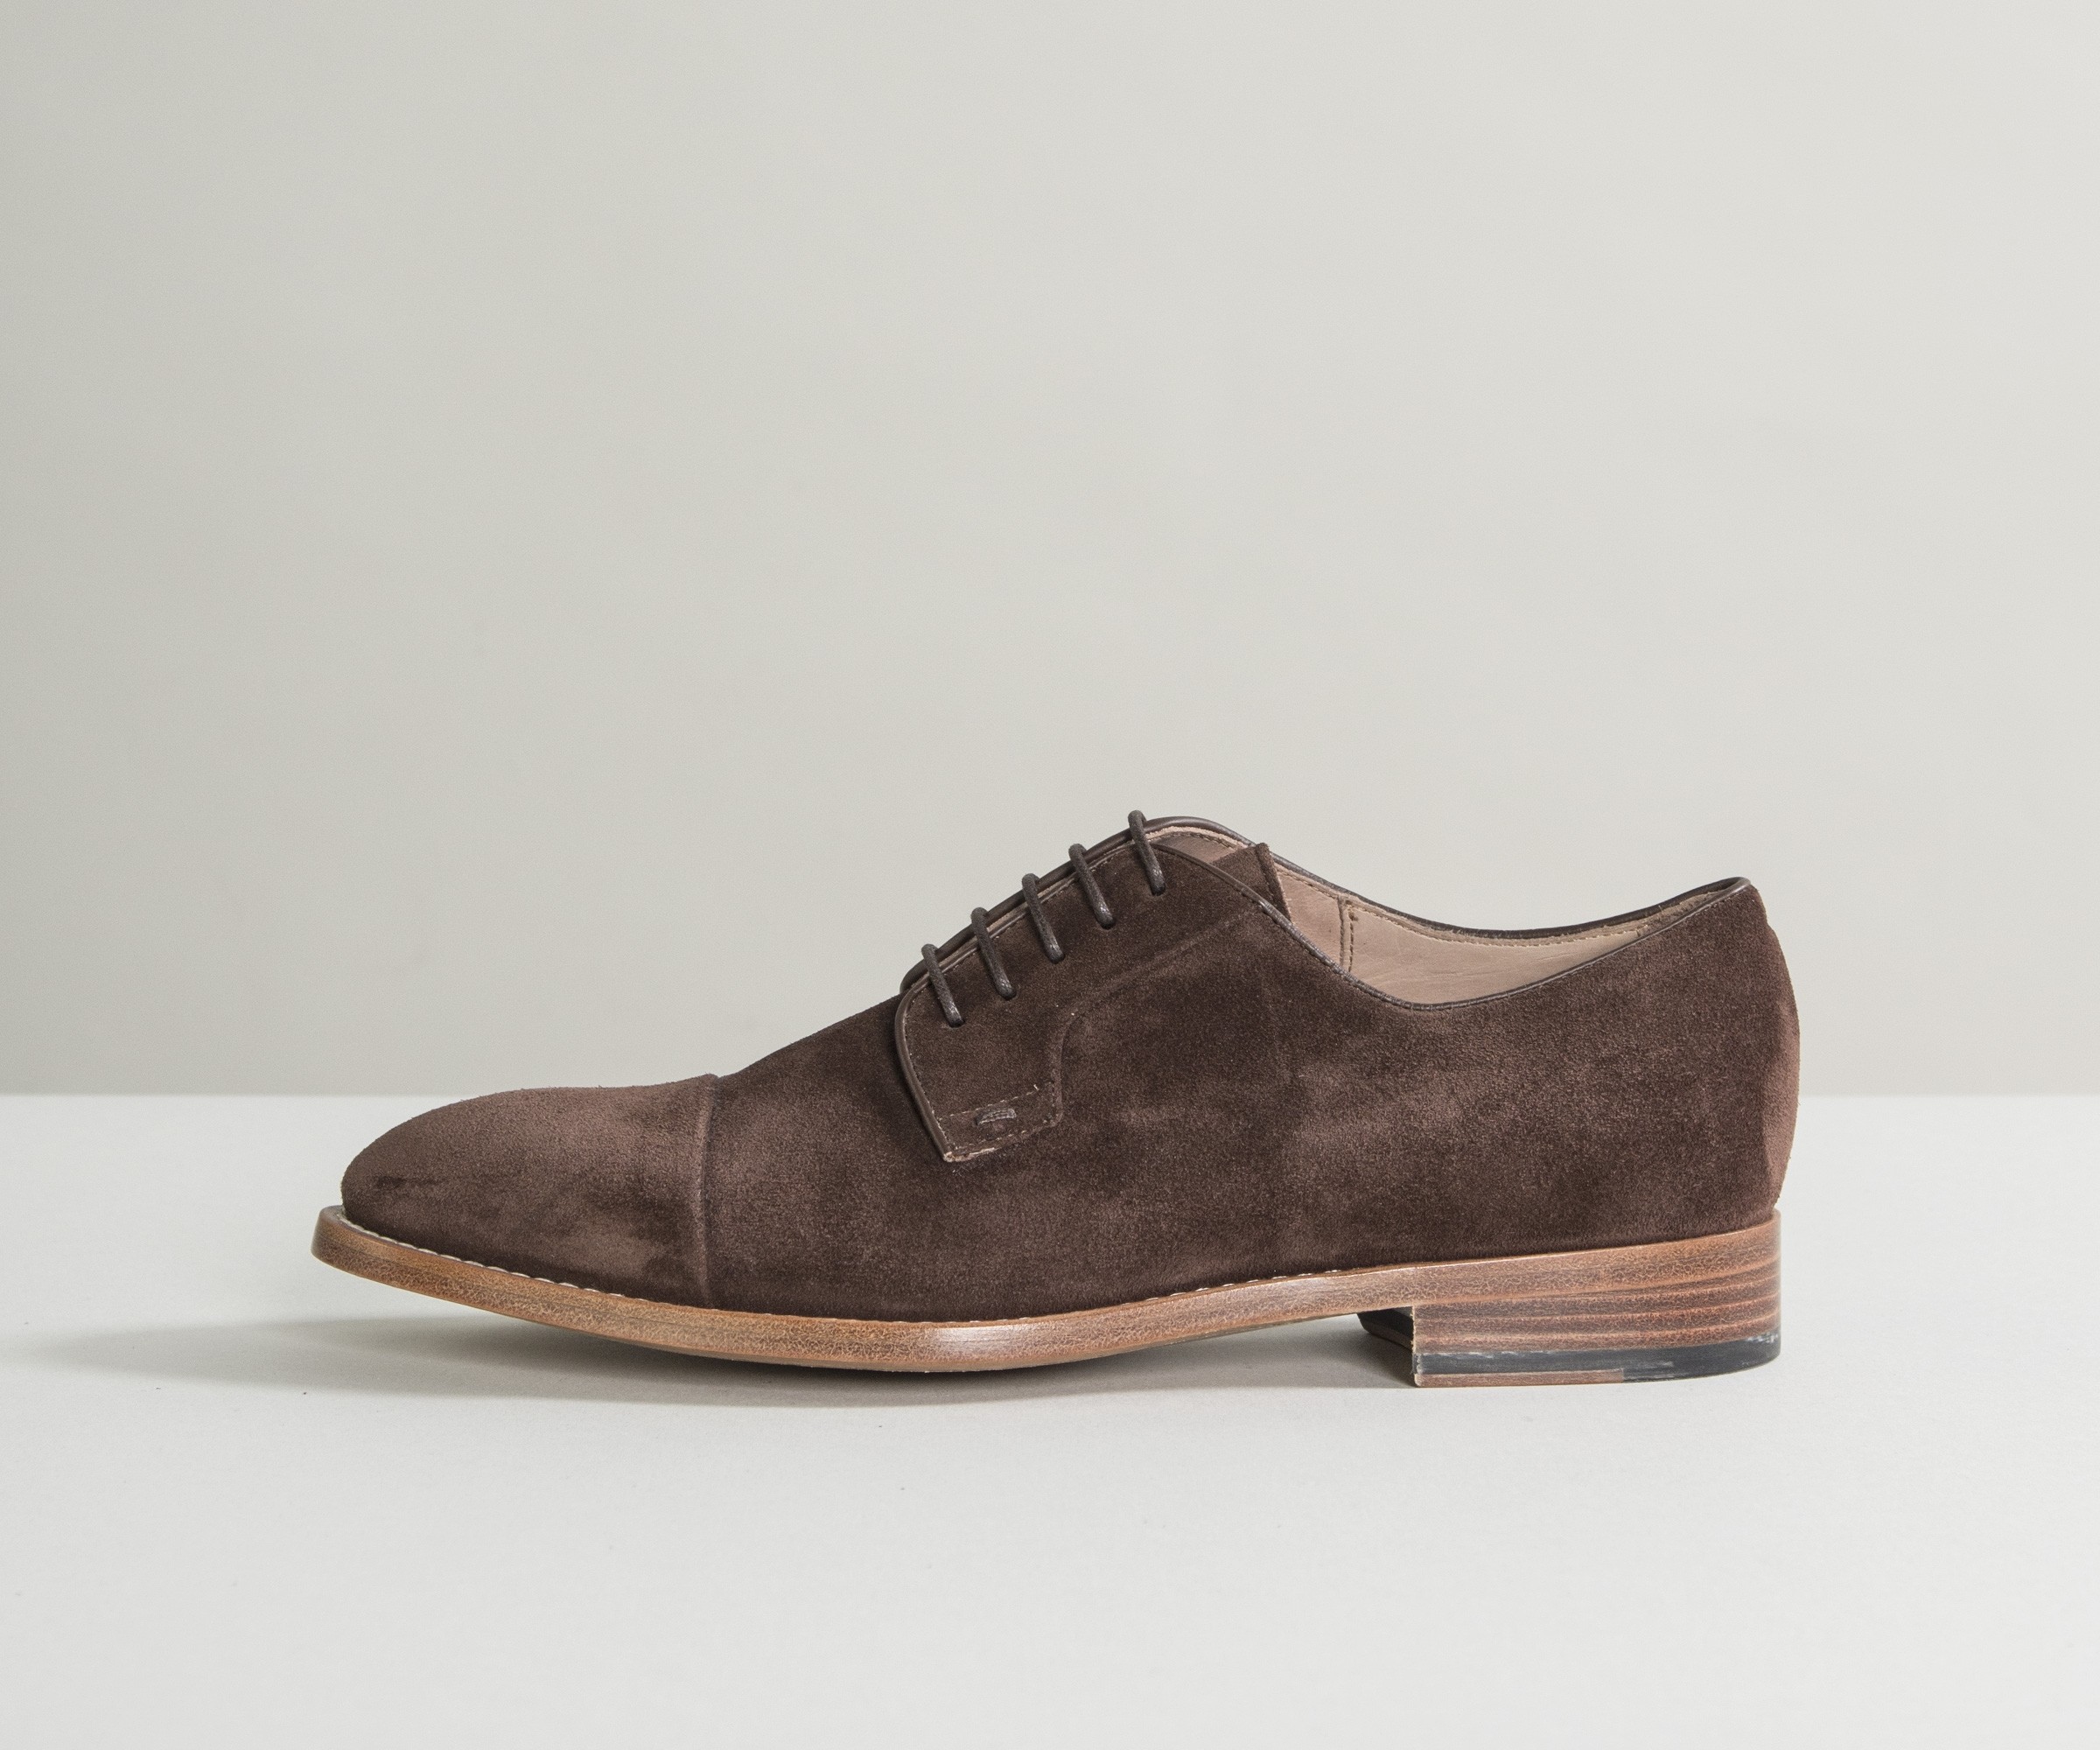 Paul Smith Shoes 'Earnest' Lace Up Suede Shoe Dark Brown